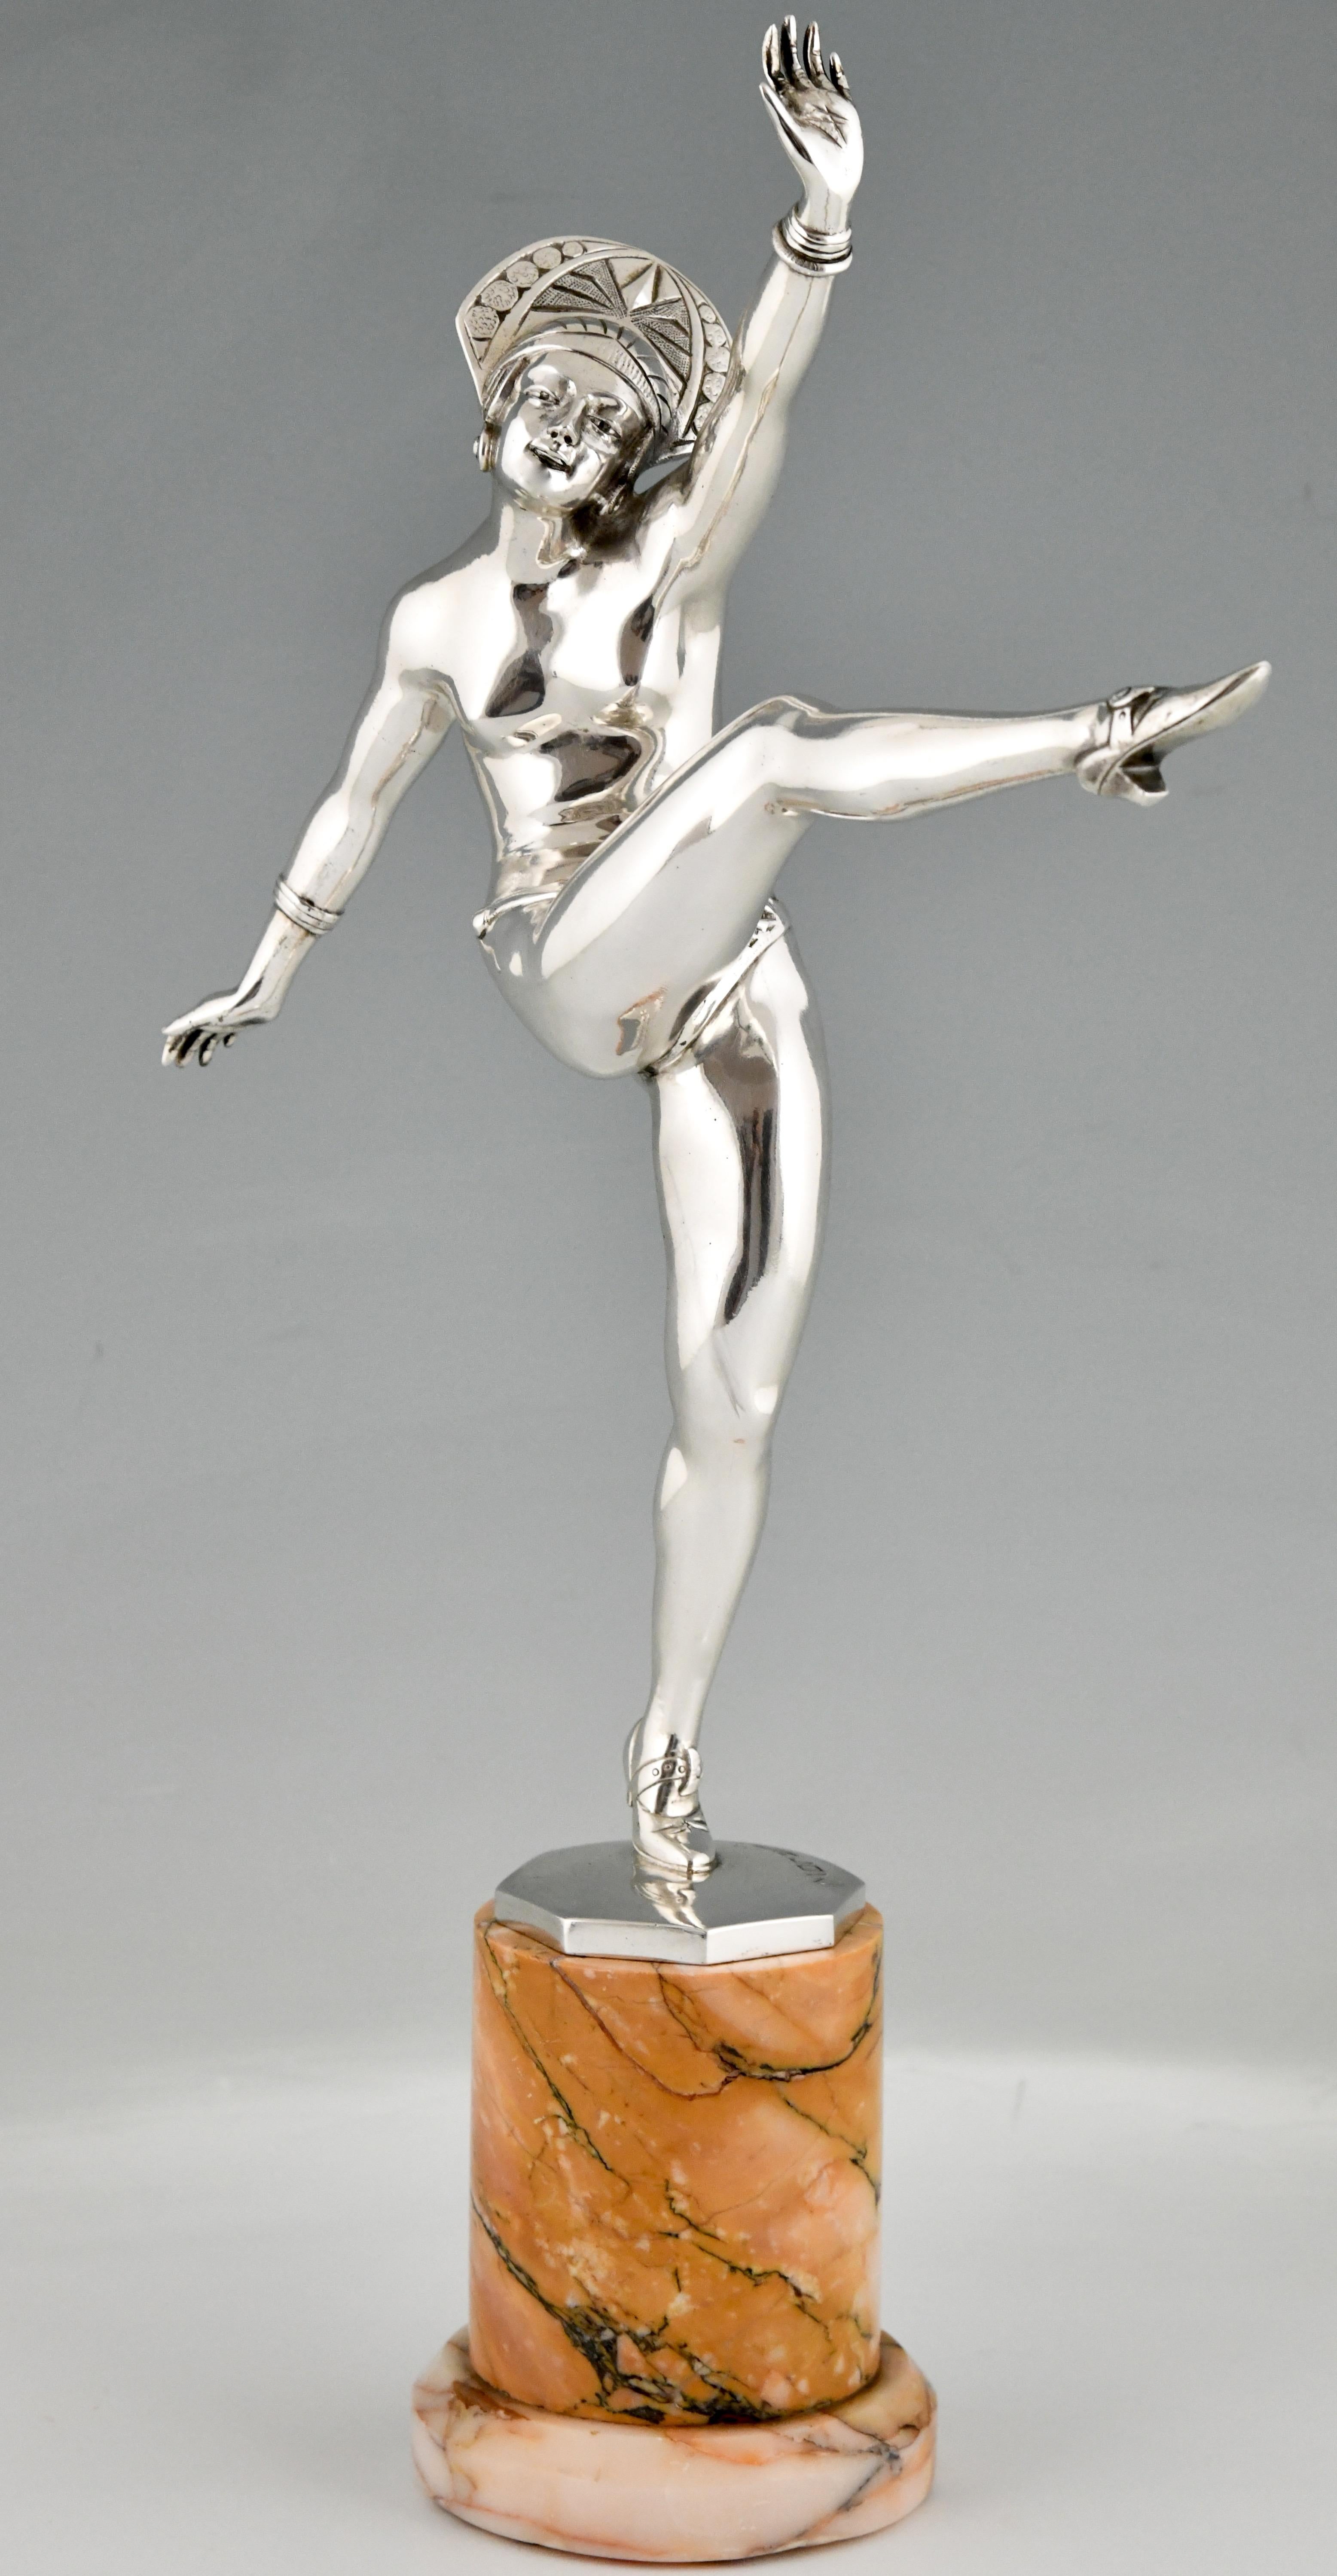 French Art Deco Silvered Bronze Sculpture Nude Dancer by J. P. Morante France, 1925 For Sale